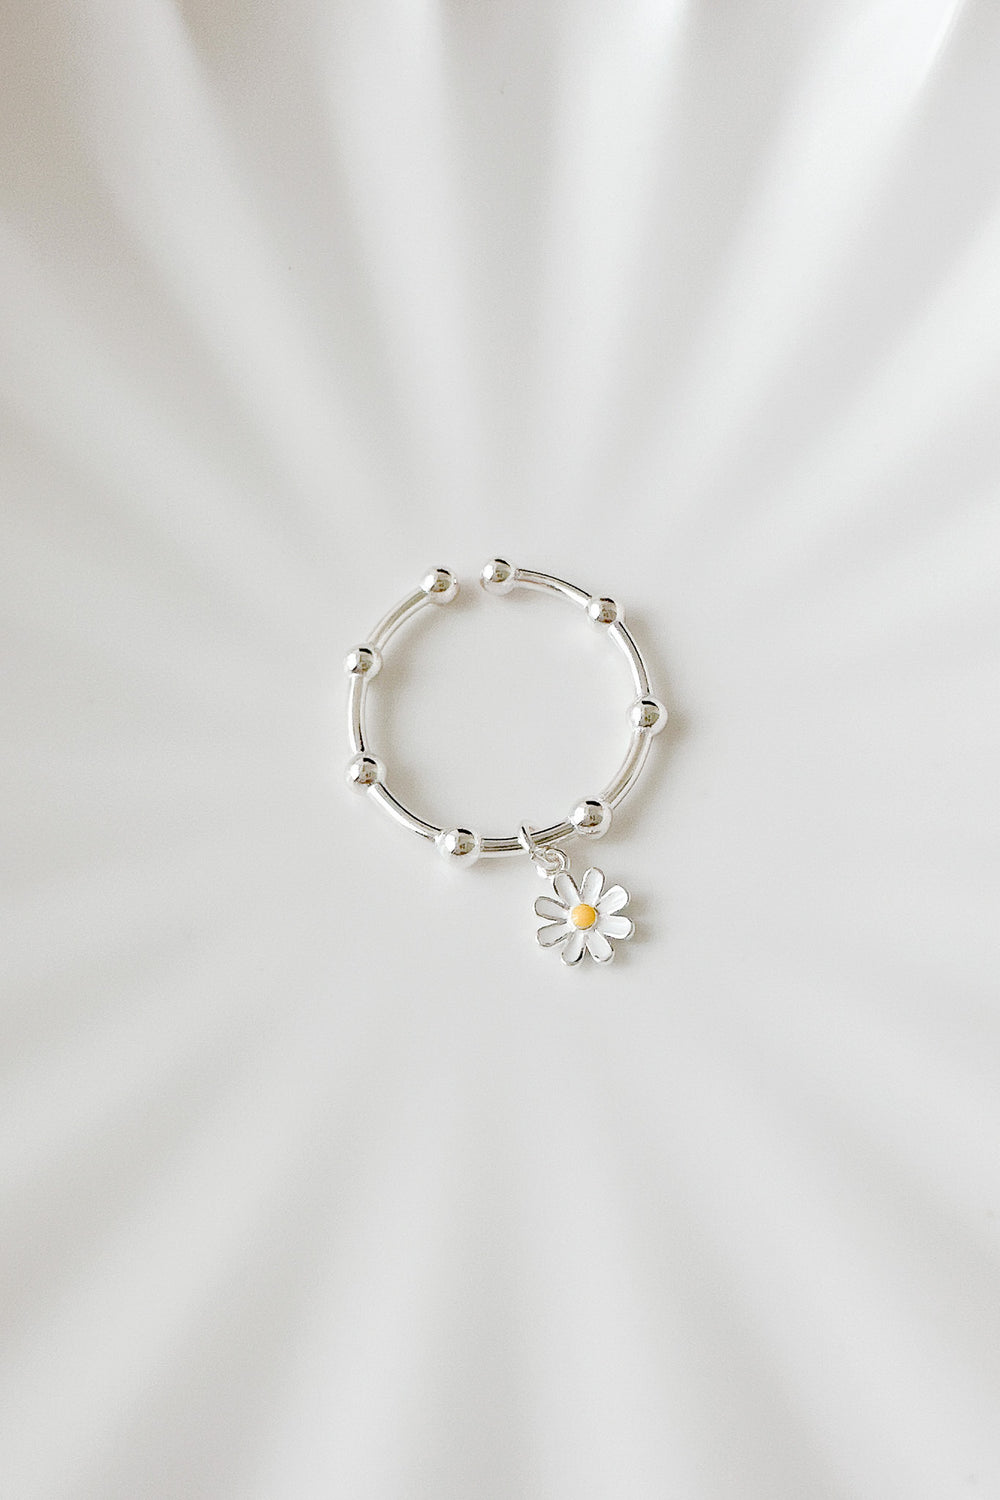 23719 - The White Daisy Ring